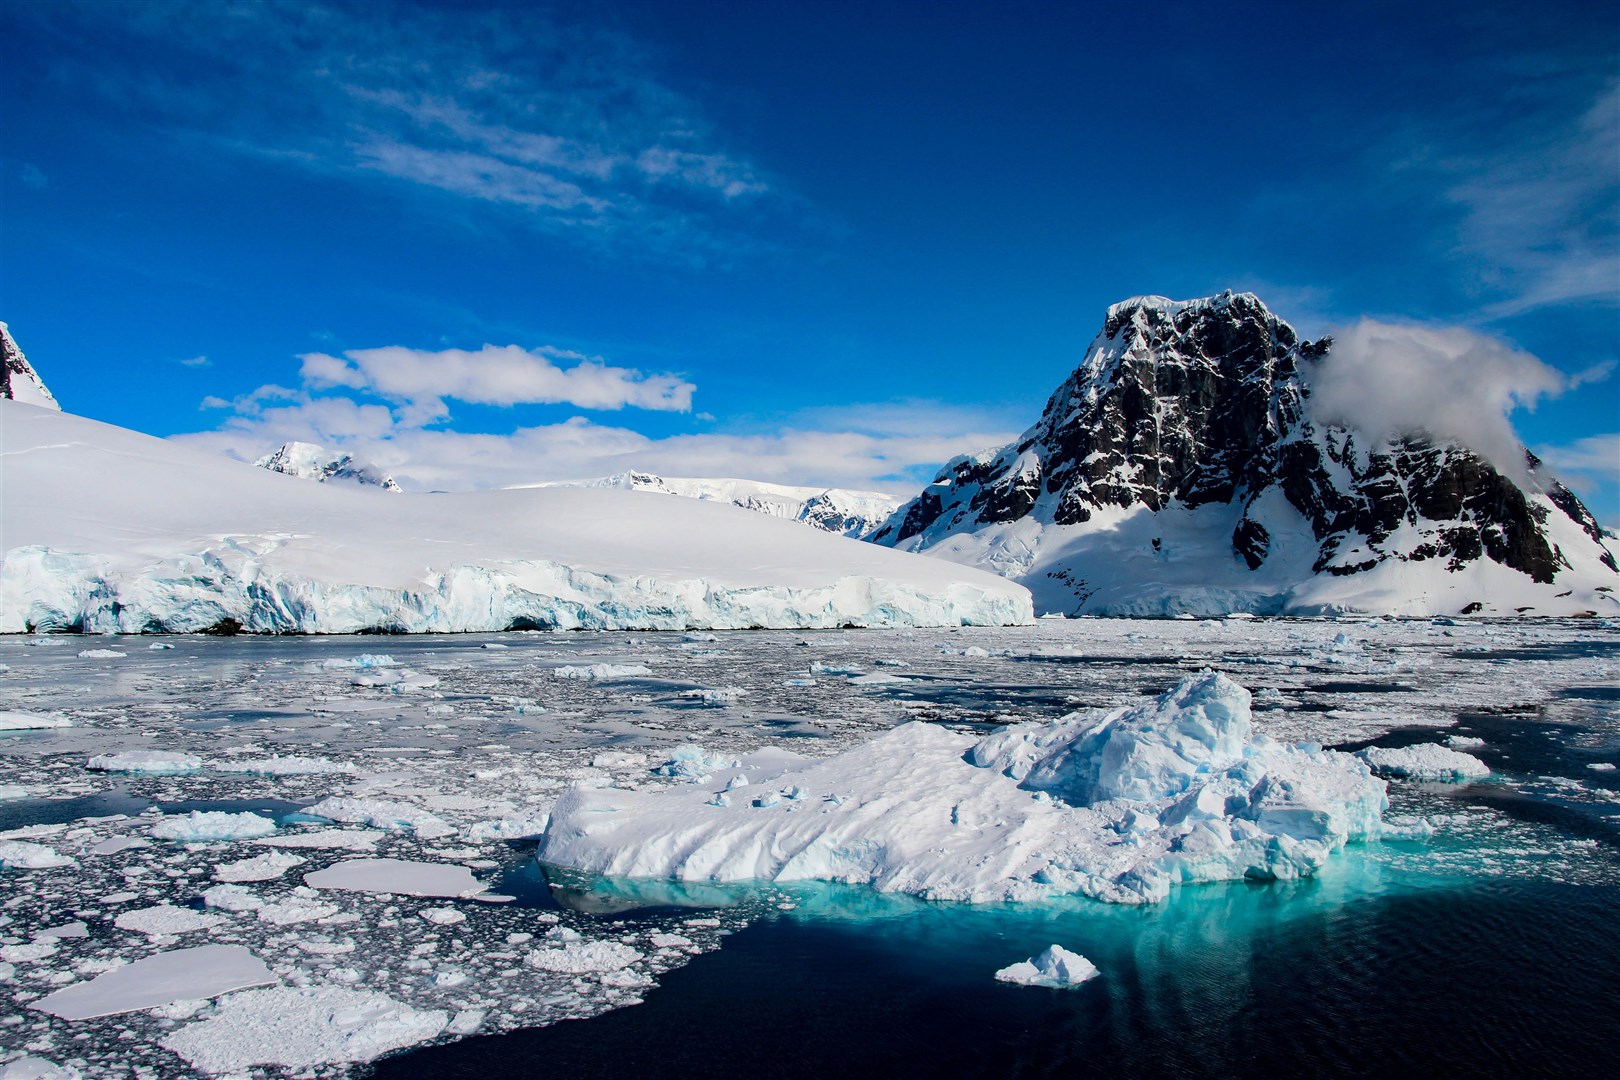 The Antarctic is a stunning but hostile environment.